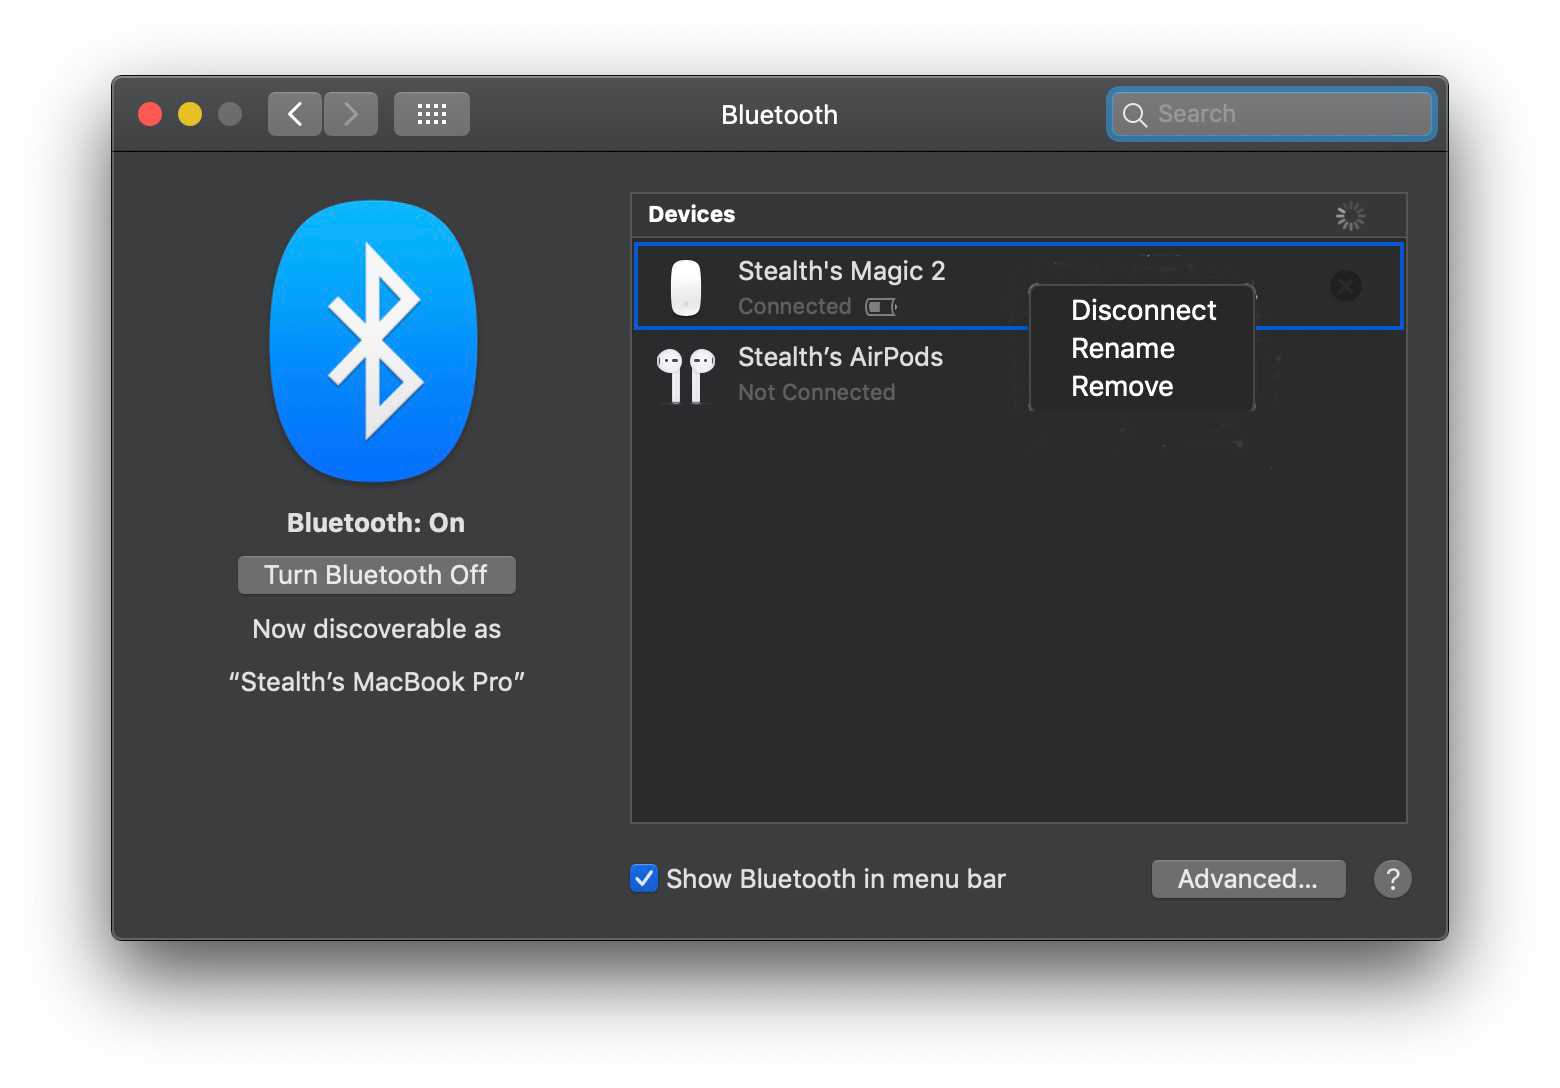 Bluetooth Device Windows 10 - How To Change The Bluetooth Name Of ...